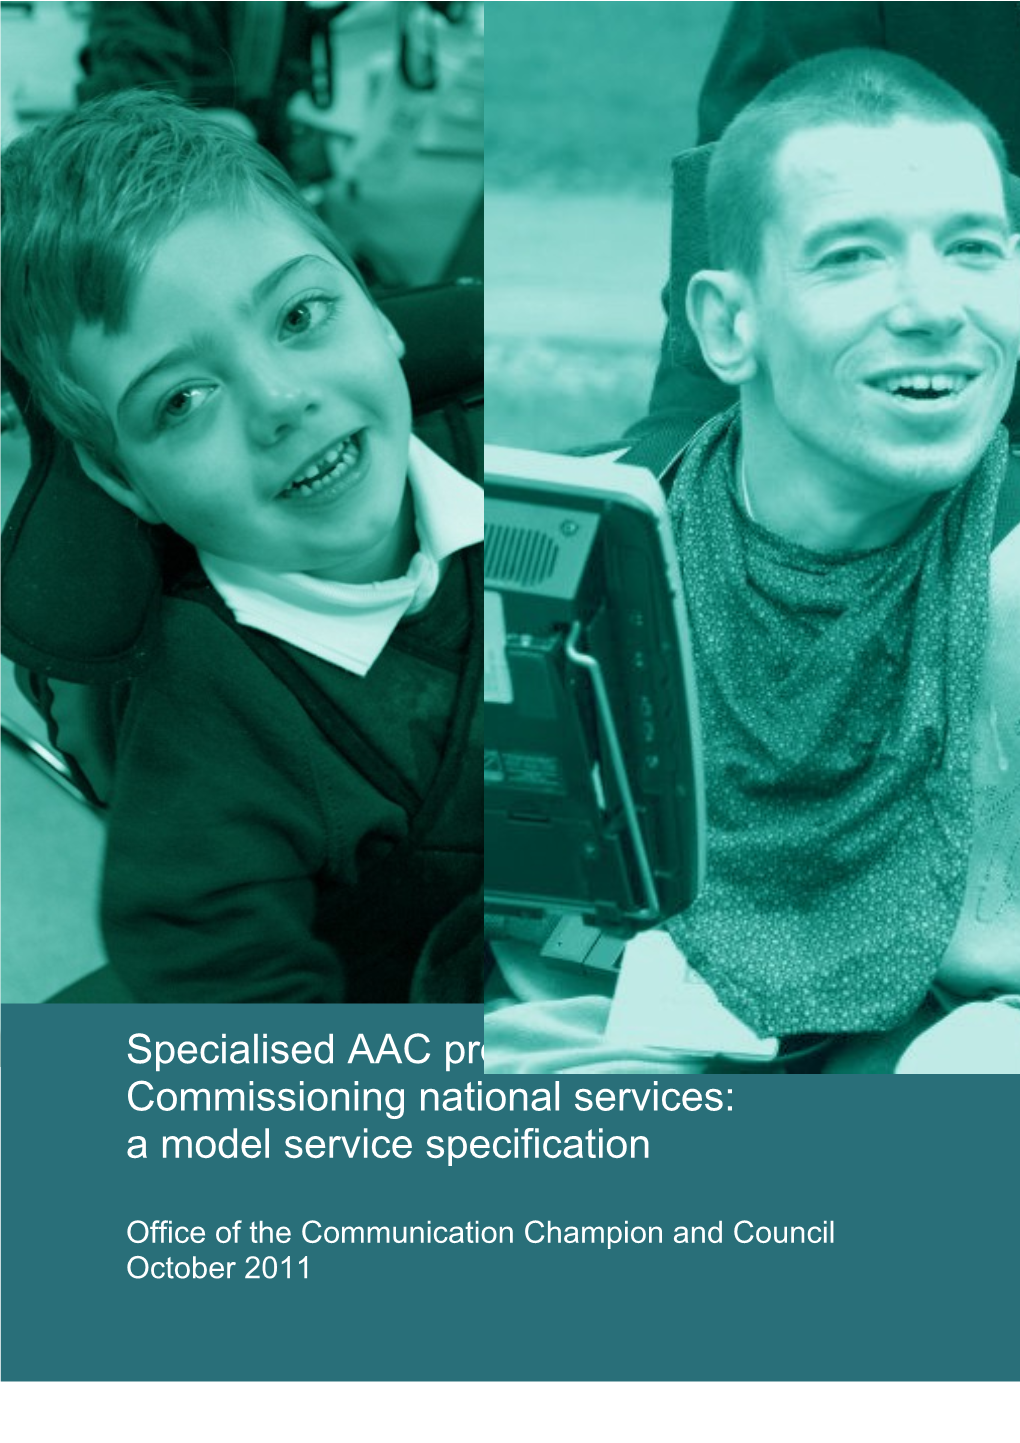 This Model Service Specification Was Commissioned by the Office of the Communication Champion